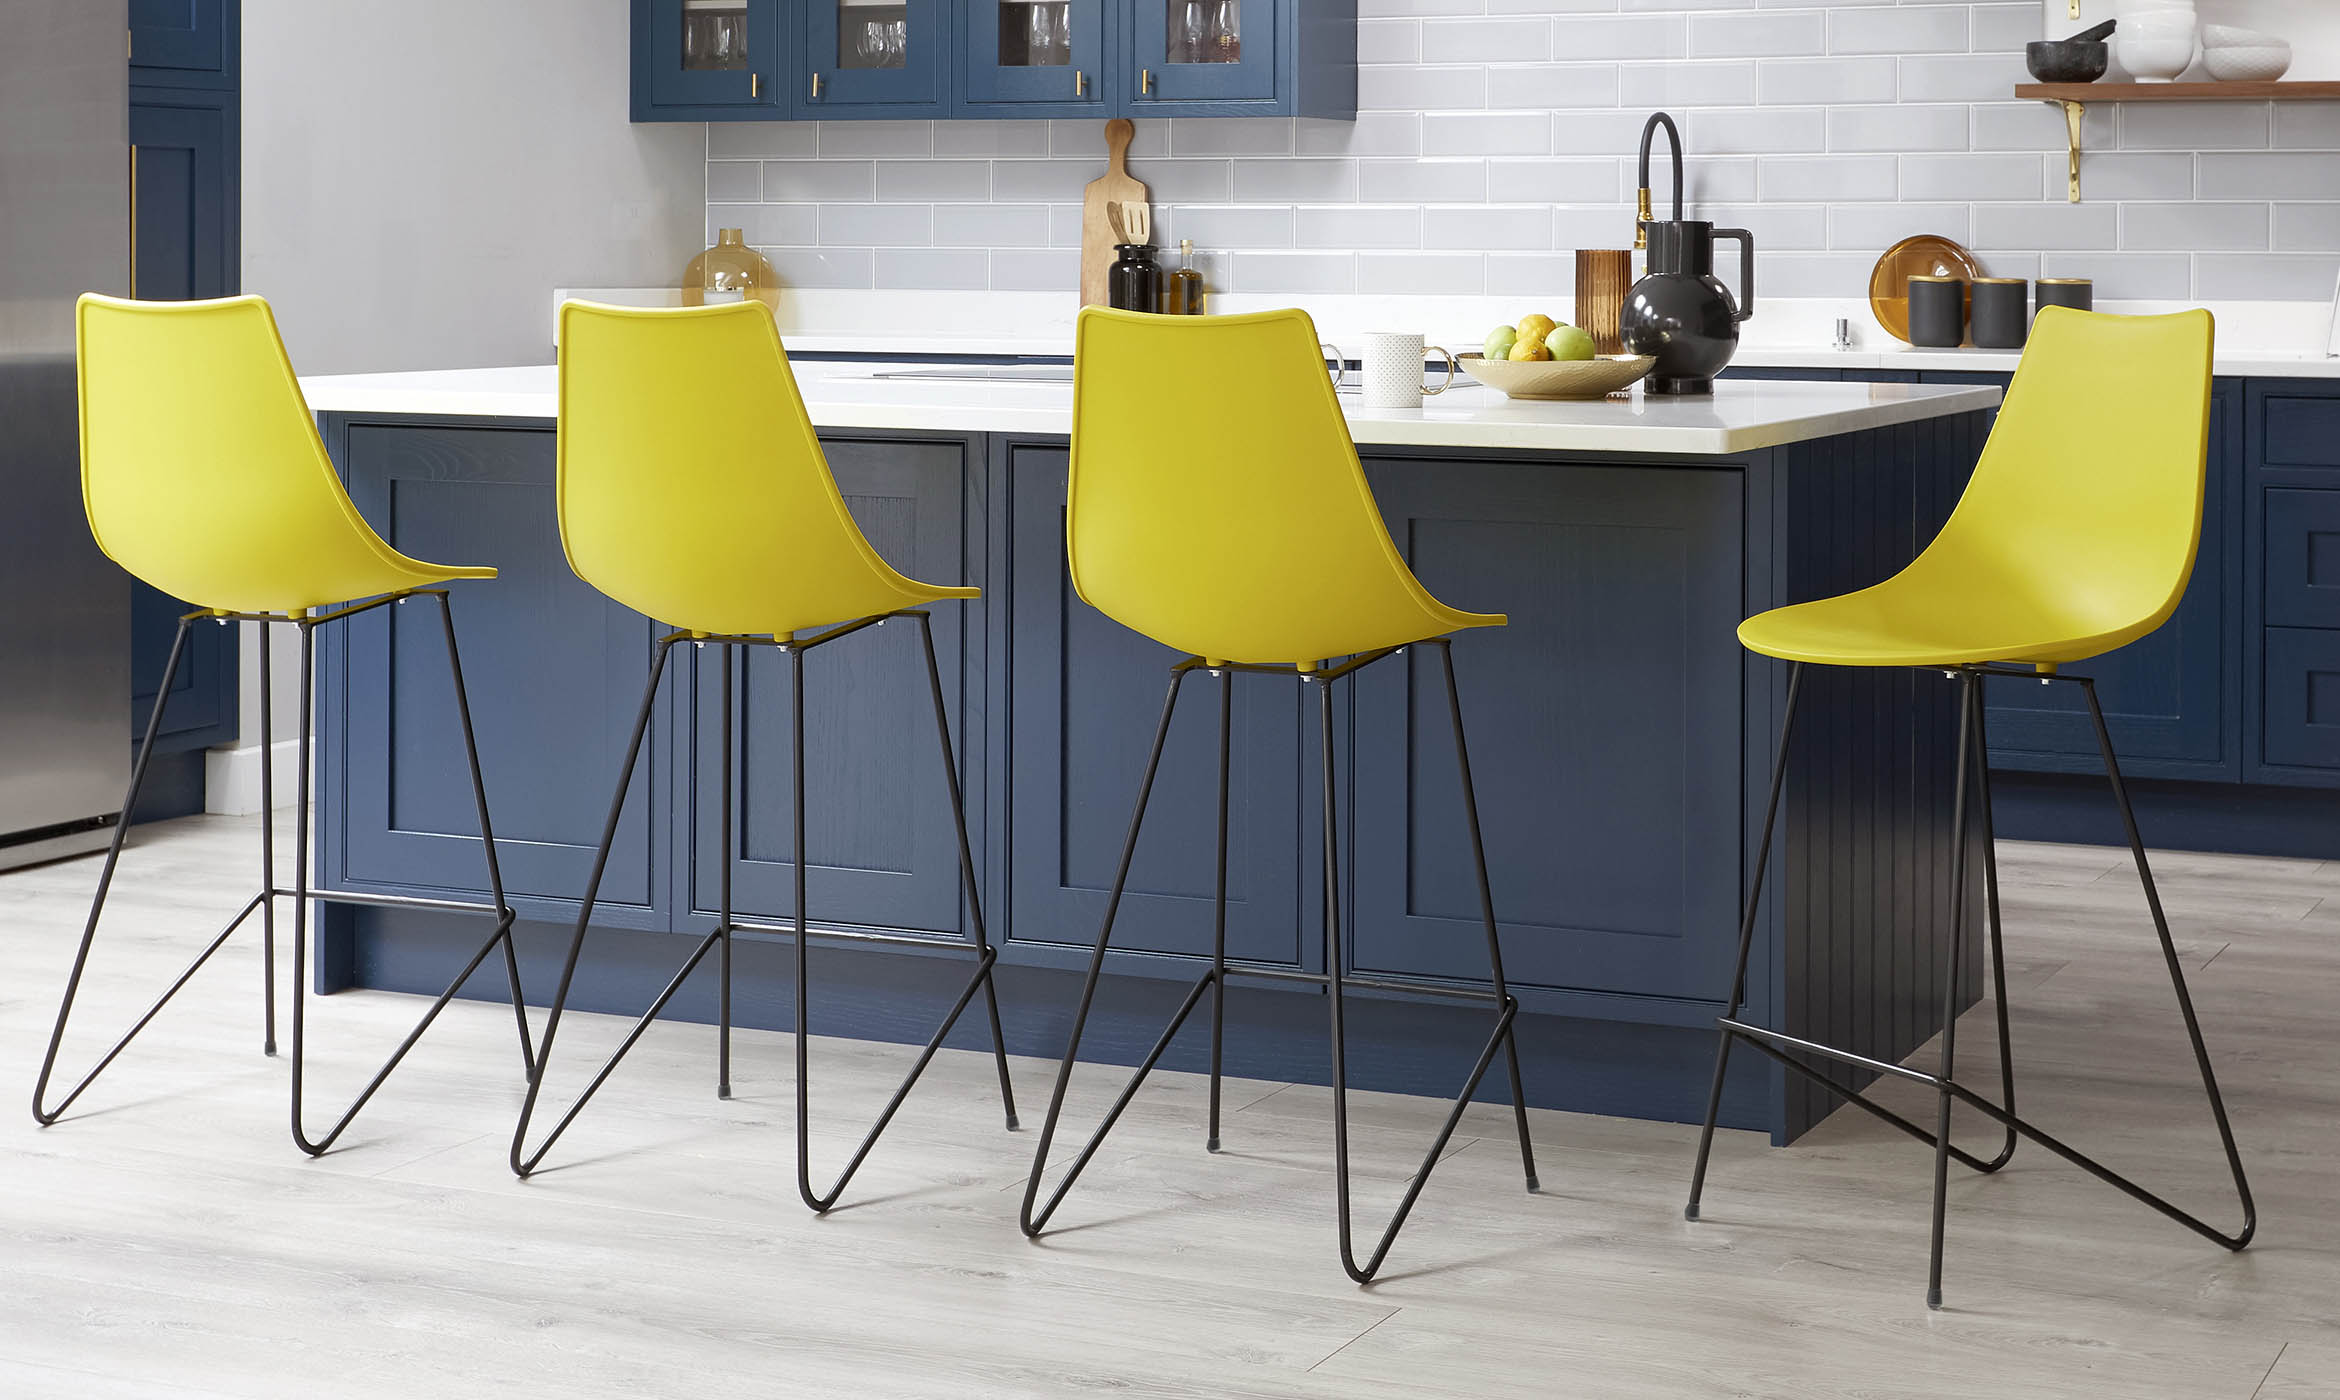 Bar Stools – Perfect for Busy Families!